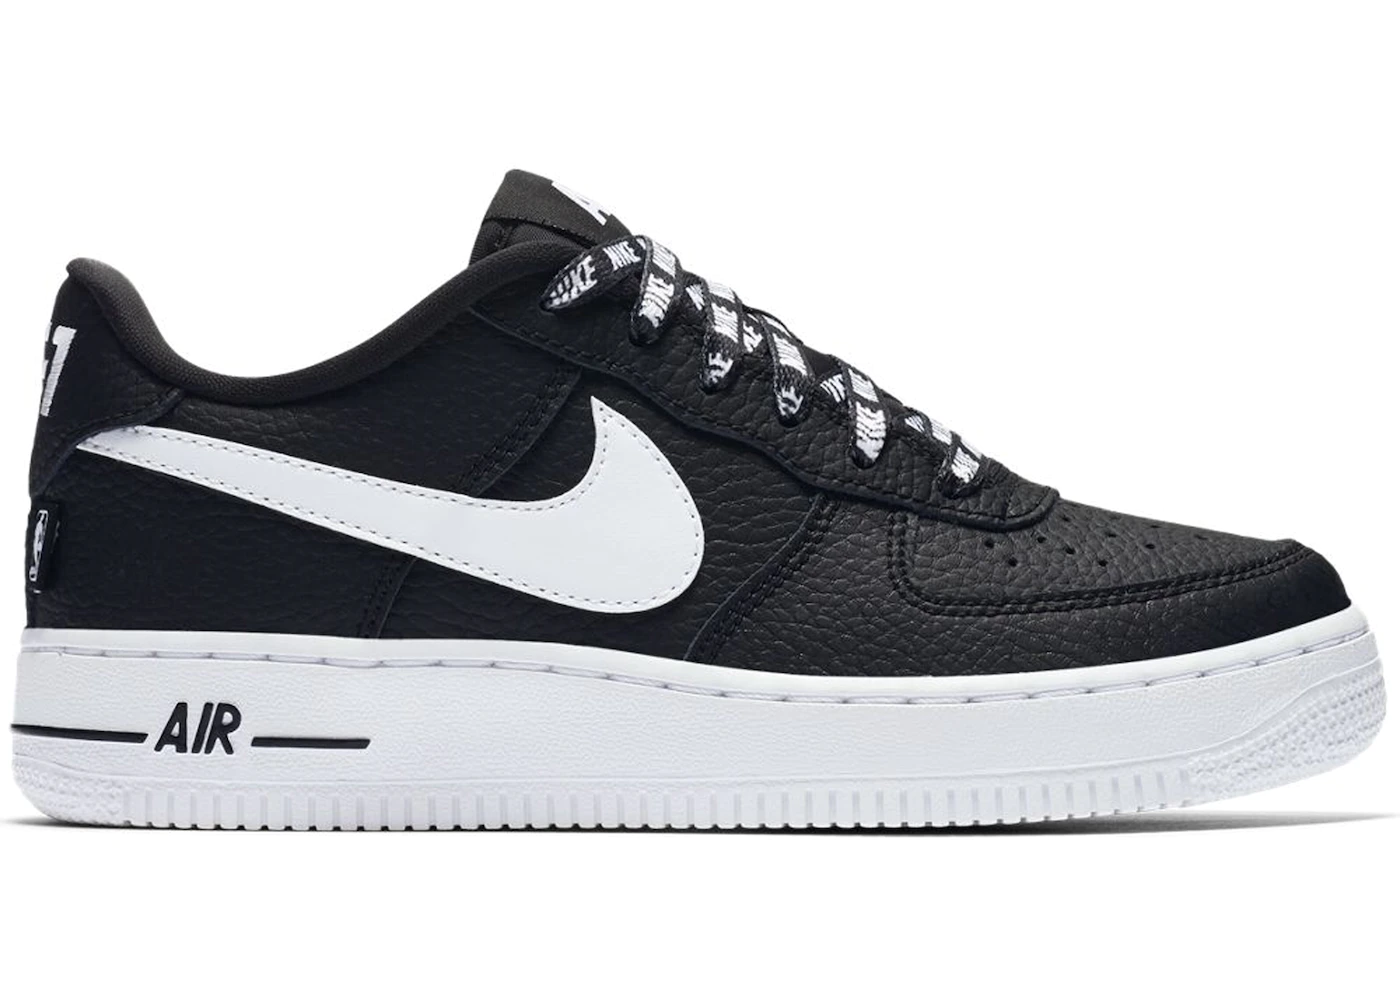 Hacer la cama Factor malo Perspectiva Nike Air Force 1 Low NBA Black White (GS) - 820438-015 - ES